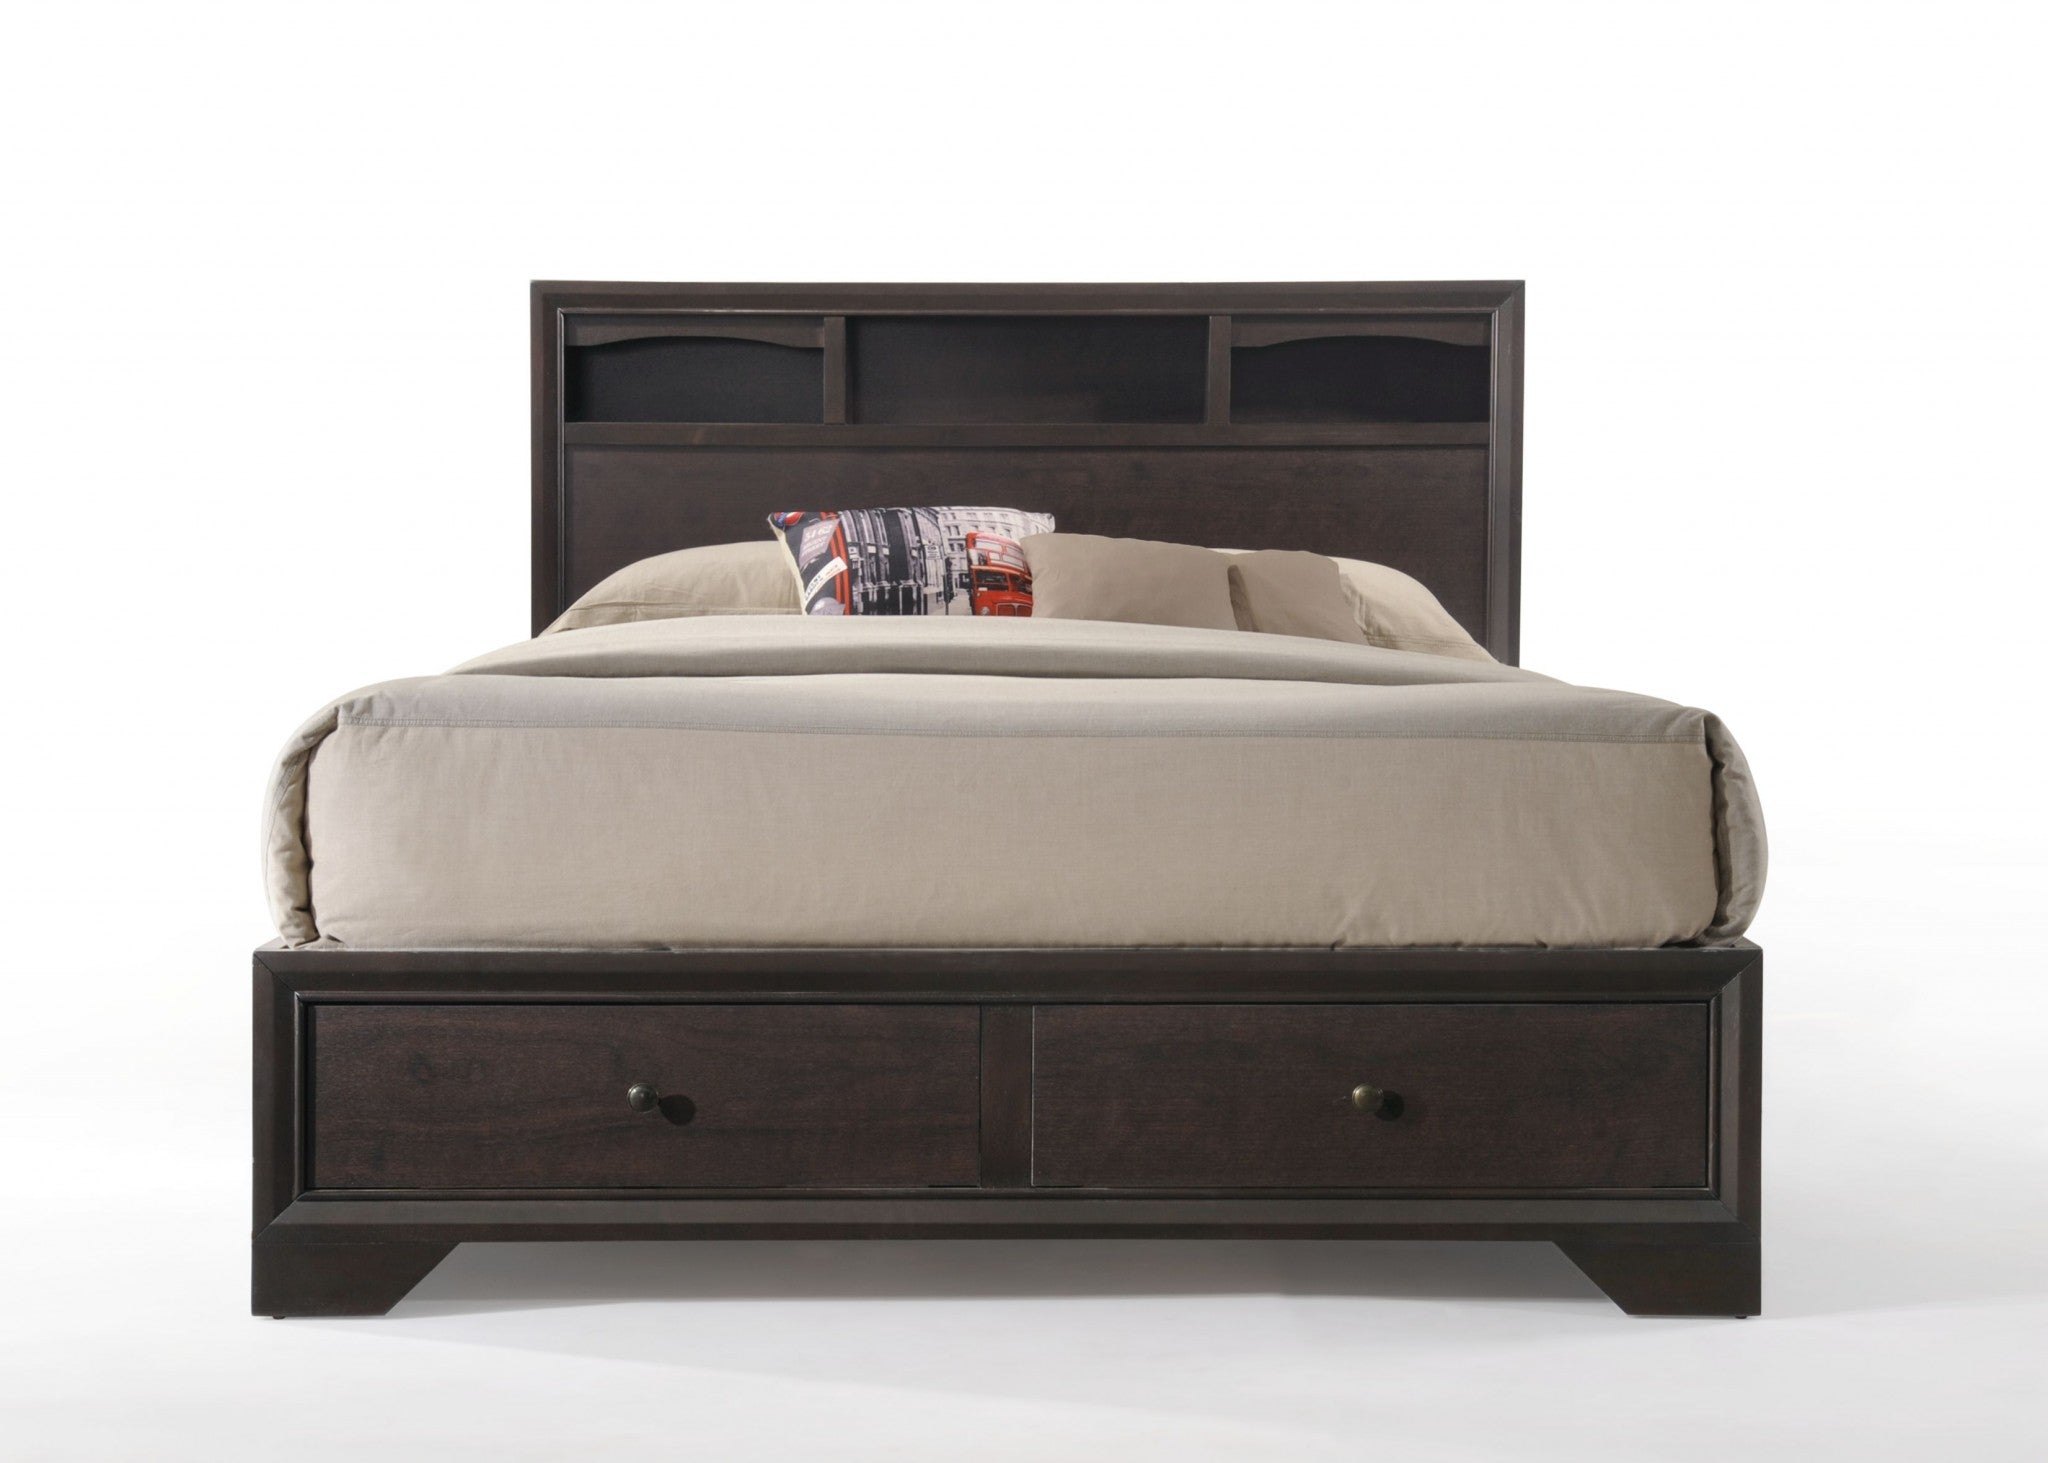 Rich Espresso Finish Queen Bed With Storage Default Title